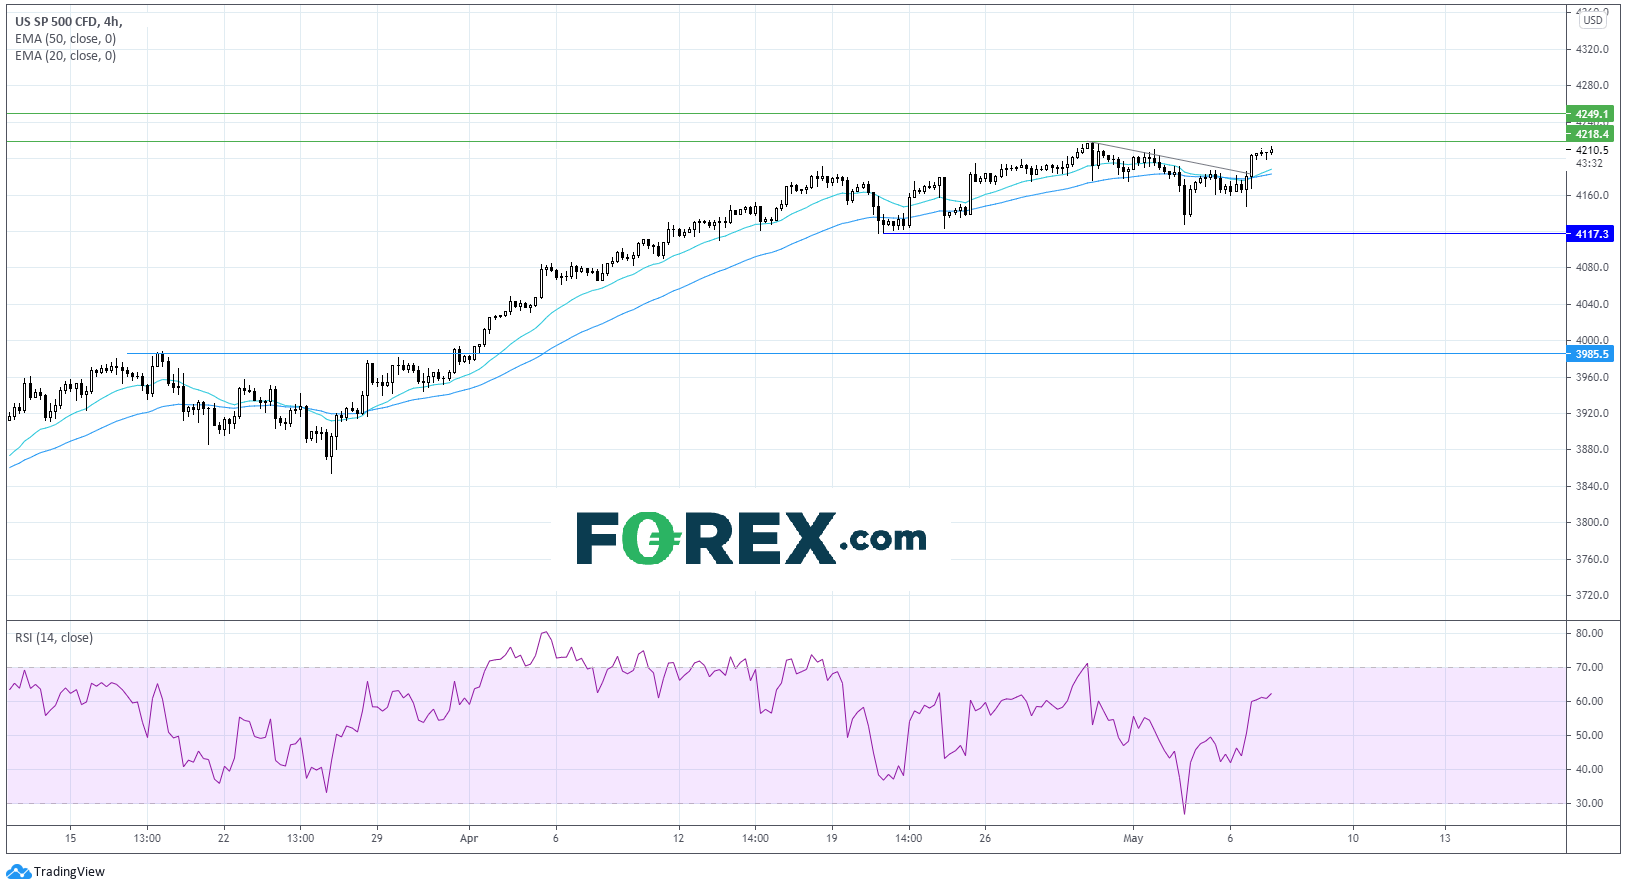 Chart analysis of US SP500. Published in May 2021 by FOREX.com